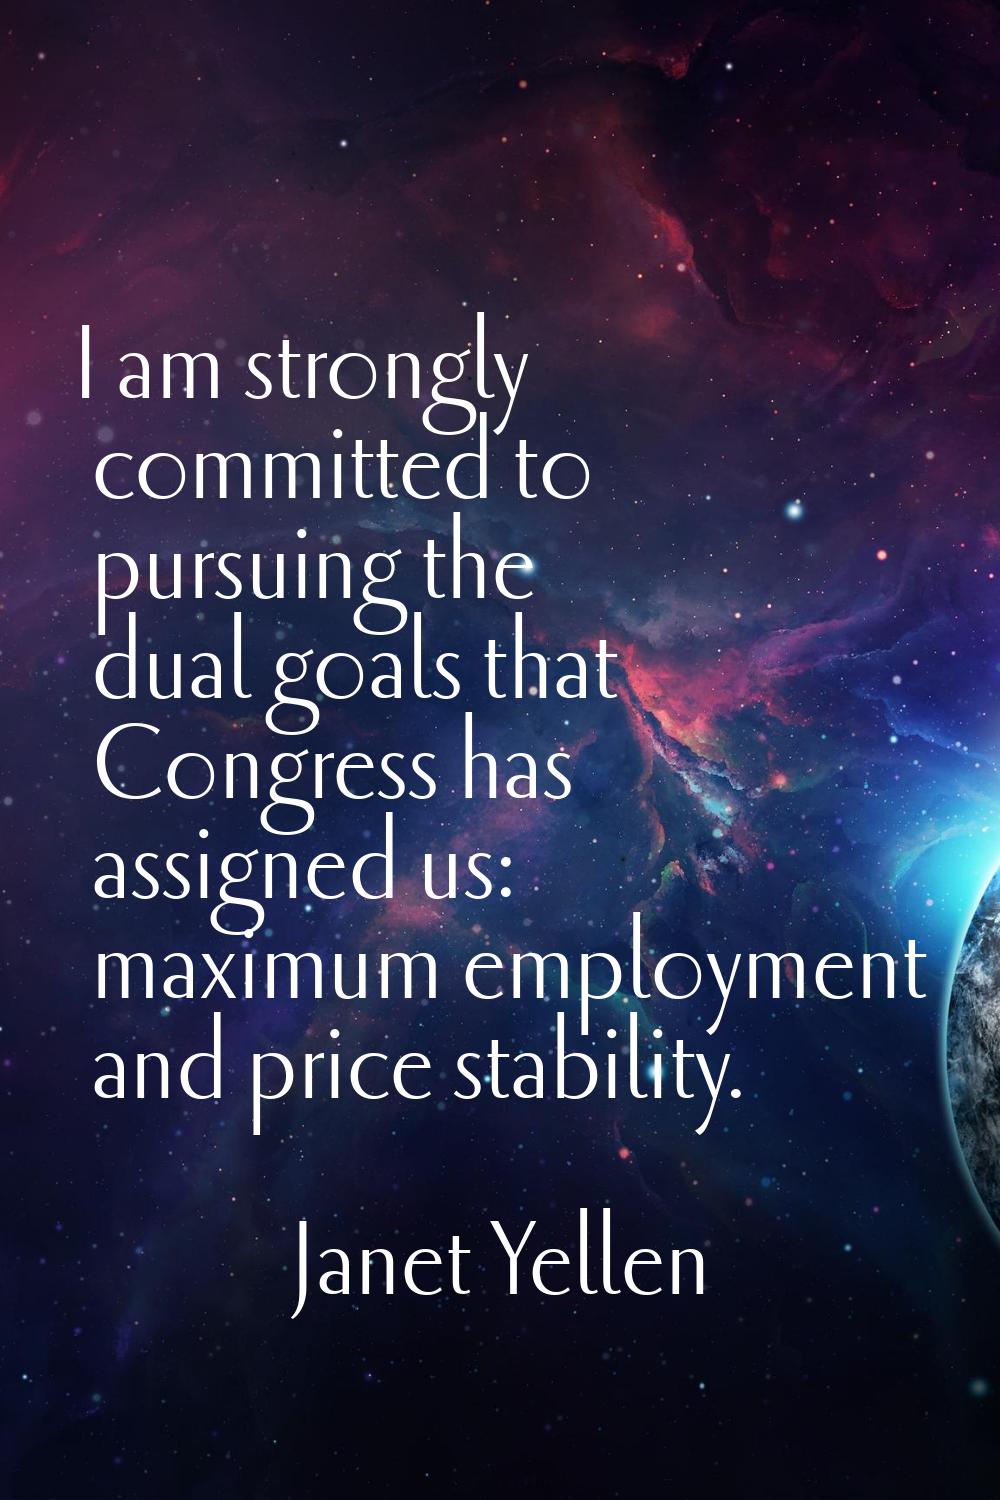 I am strongly committed to pursuing the dual goals that Congress has assigned us: maximum employmen